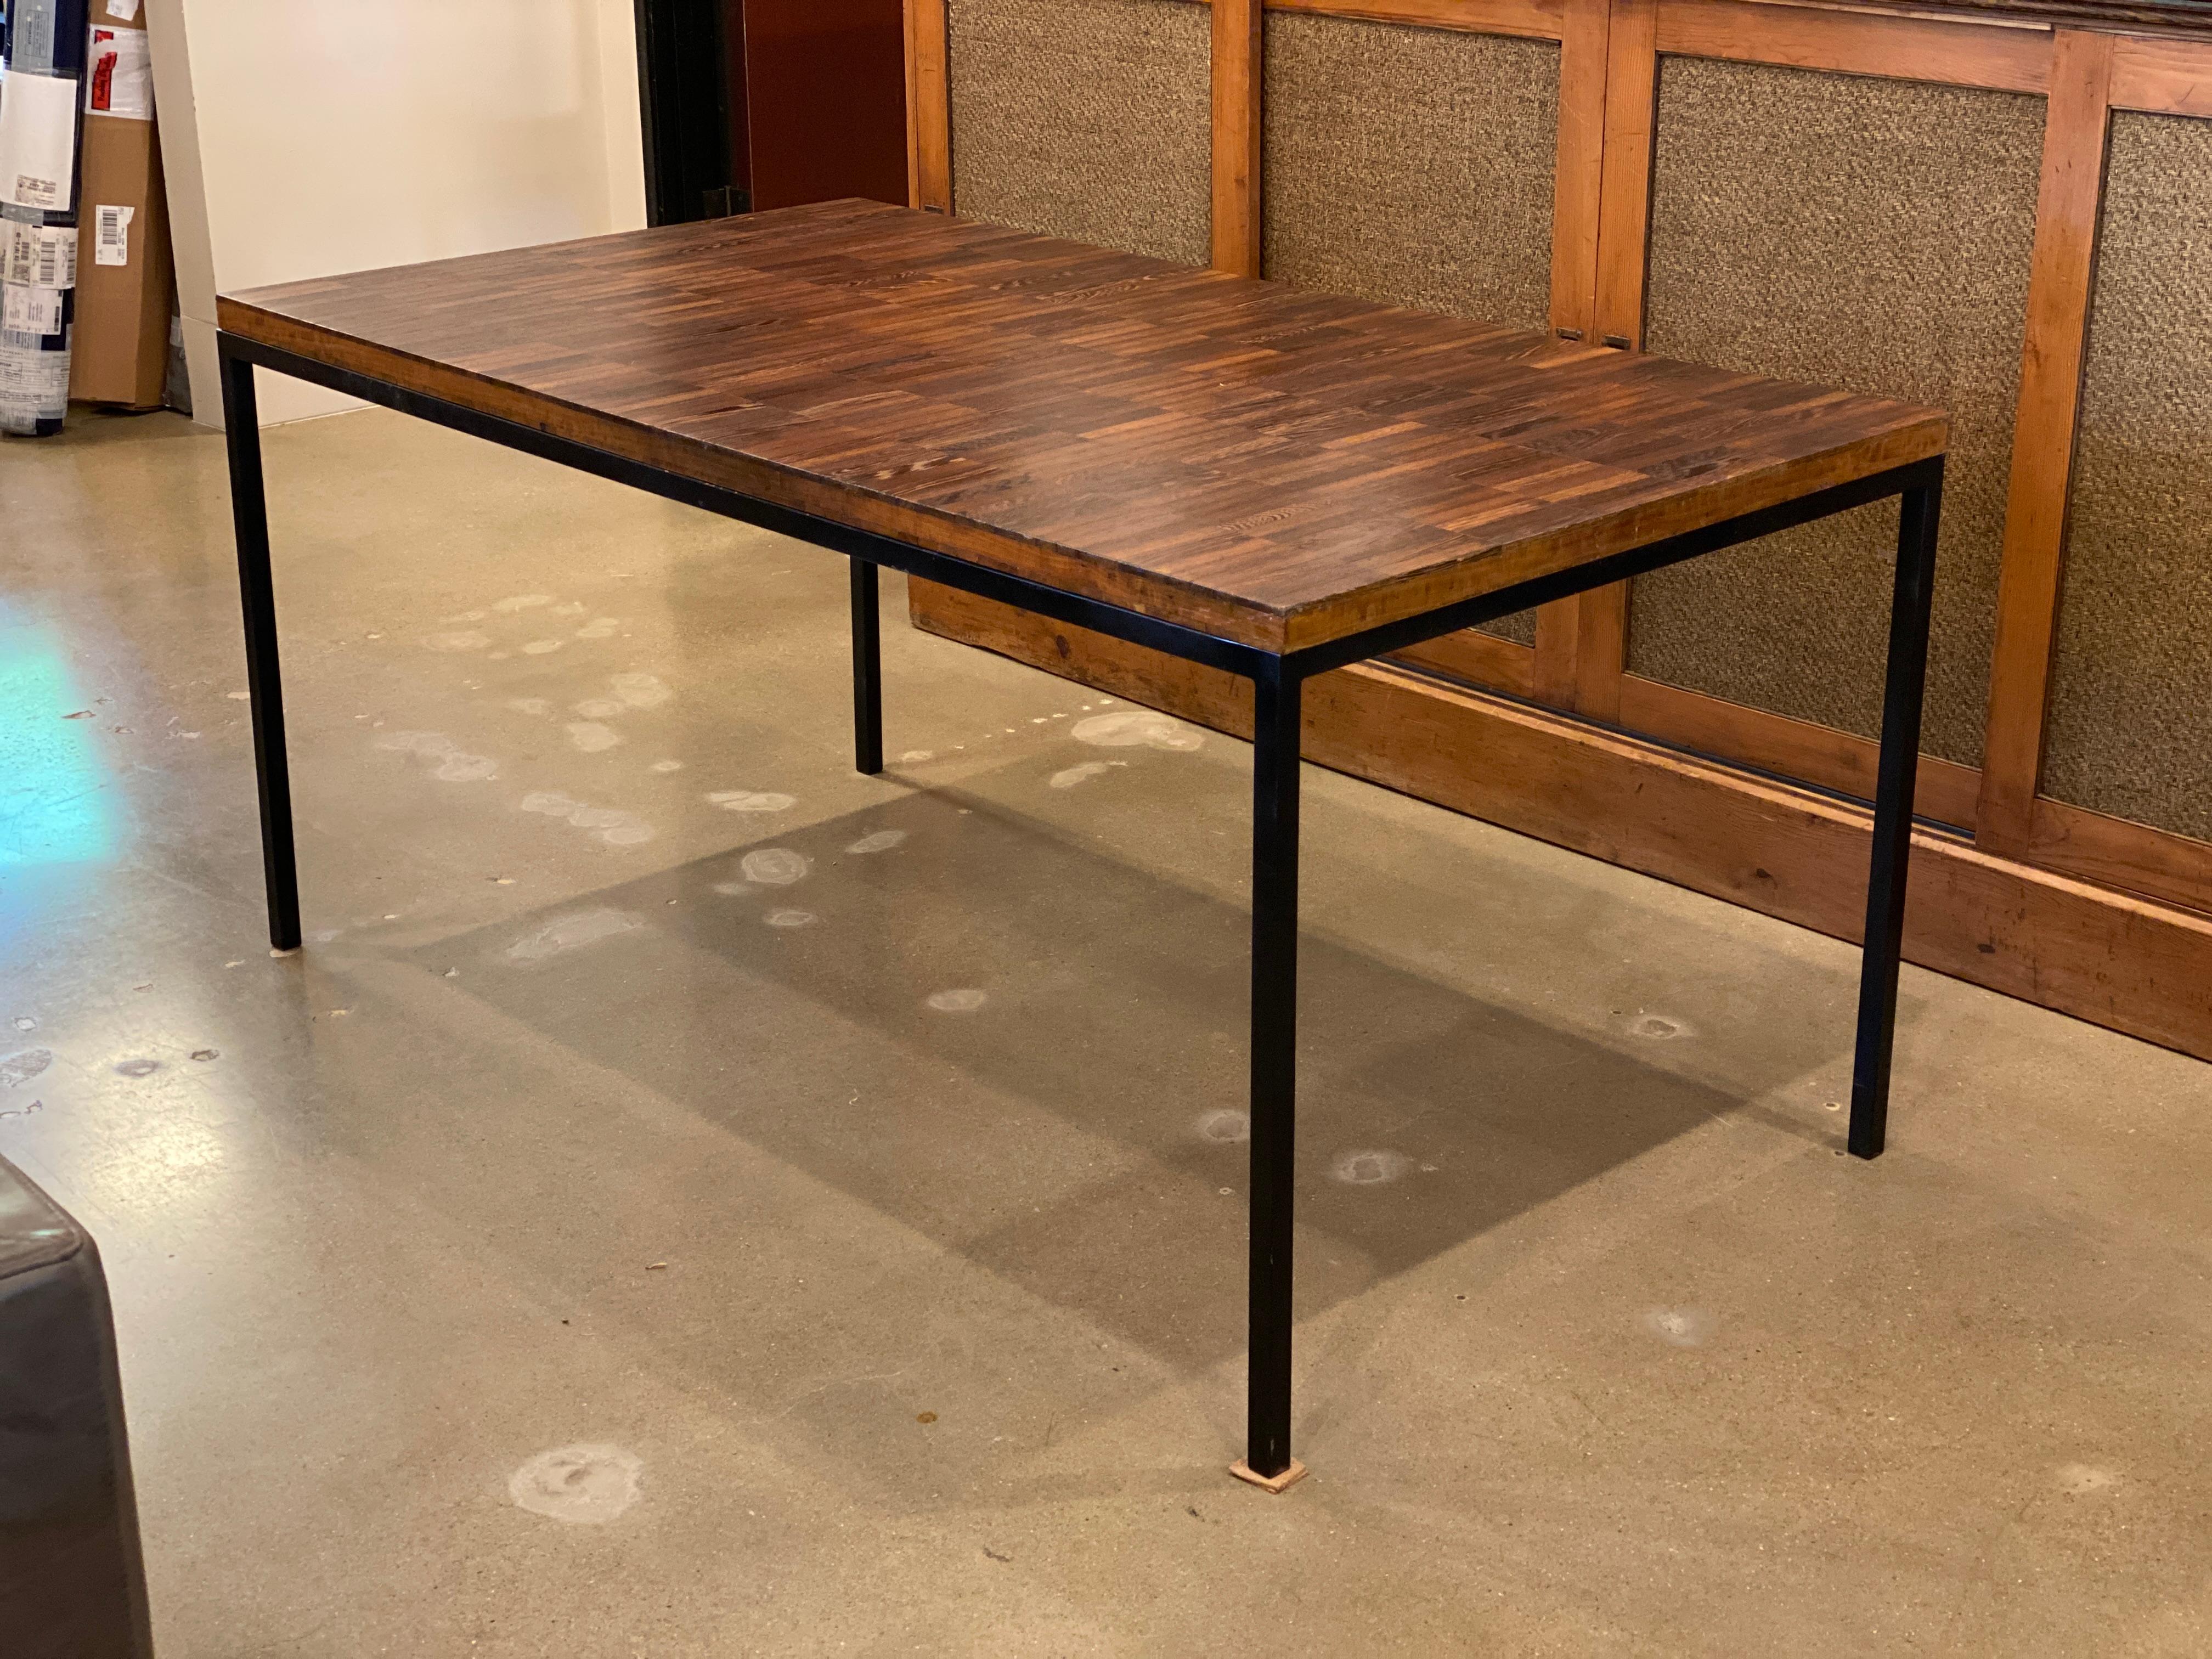 Mid-Century Modern table with blackened steel Parsons style base and wenge wood block top. Well sized for dining table, desk or conference table. Belgium, 1960s.